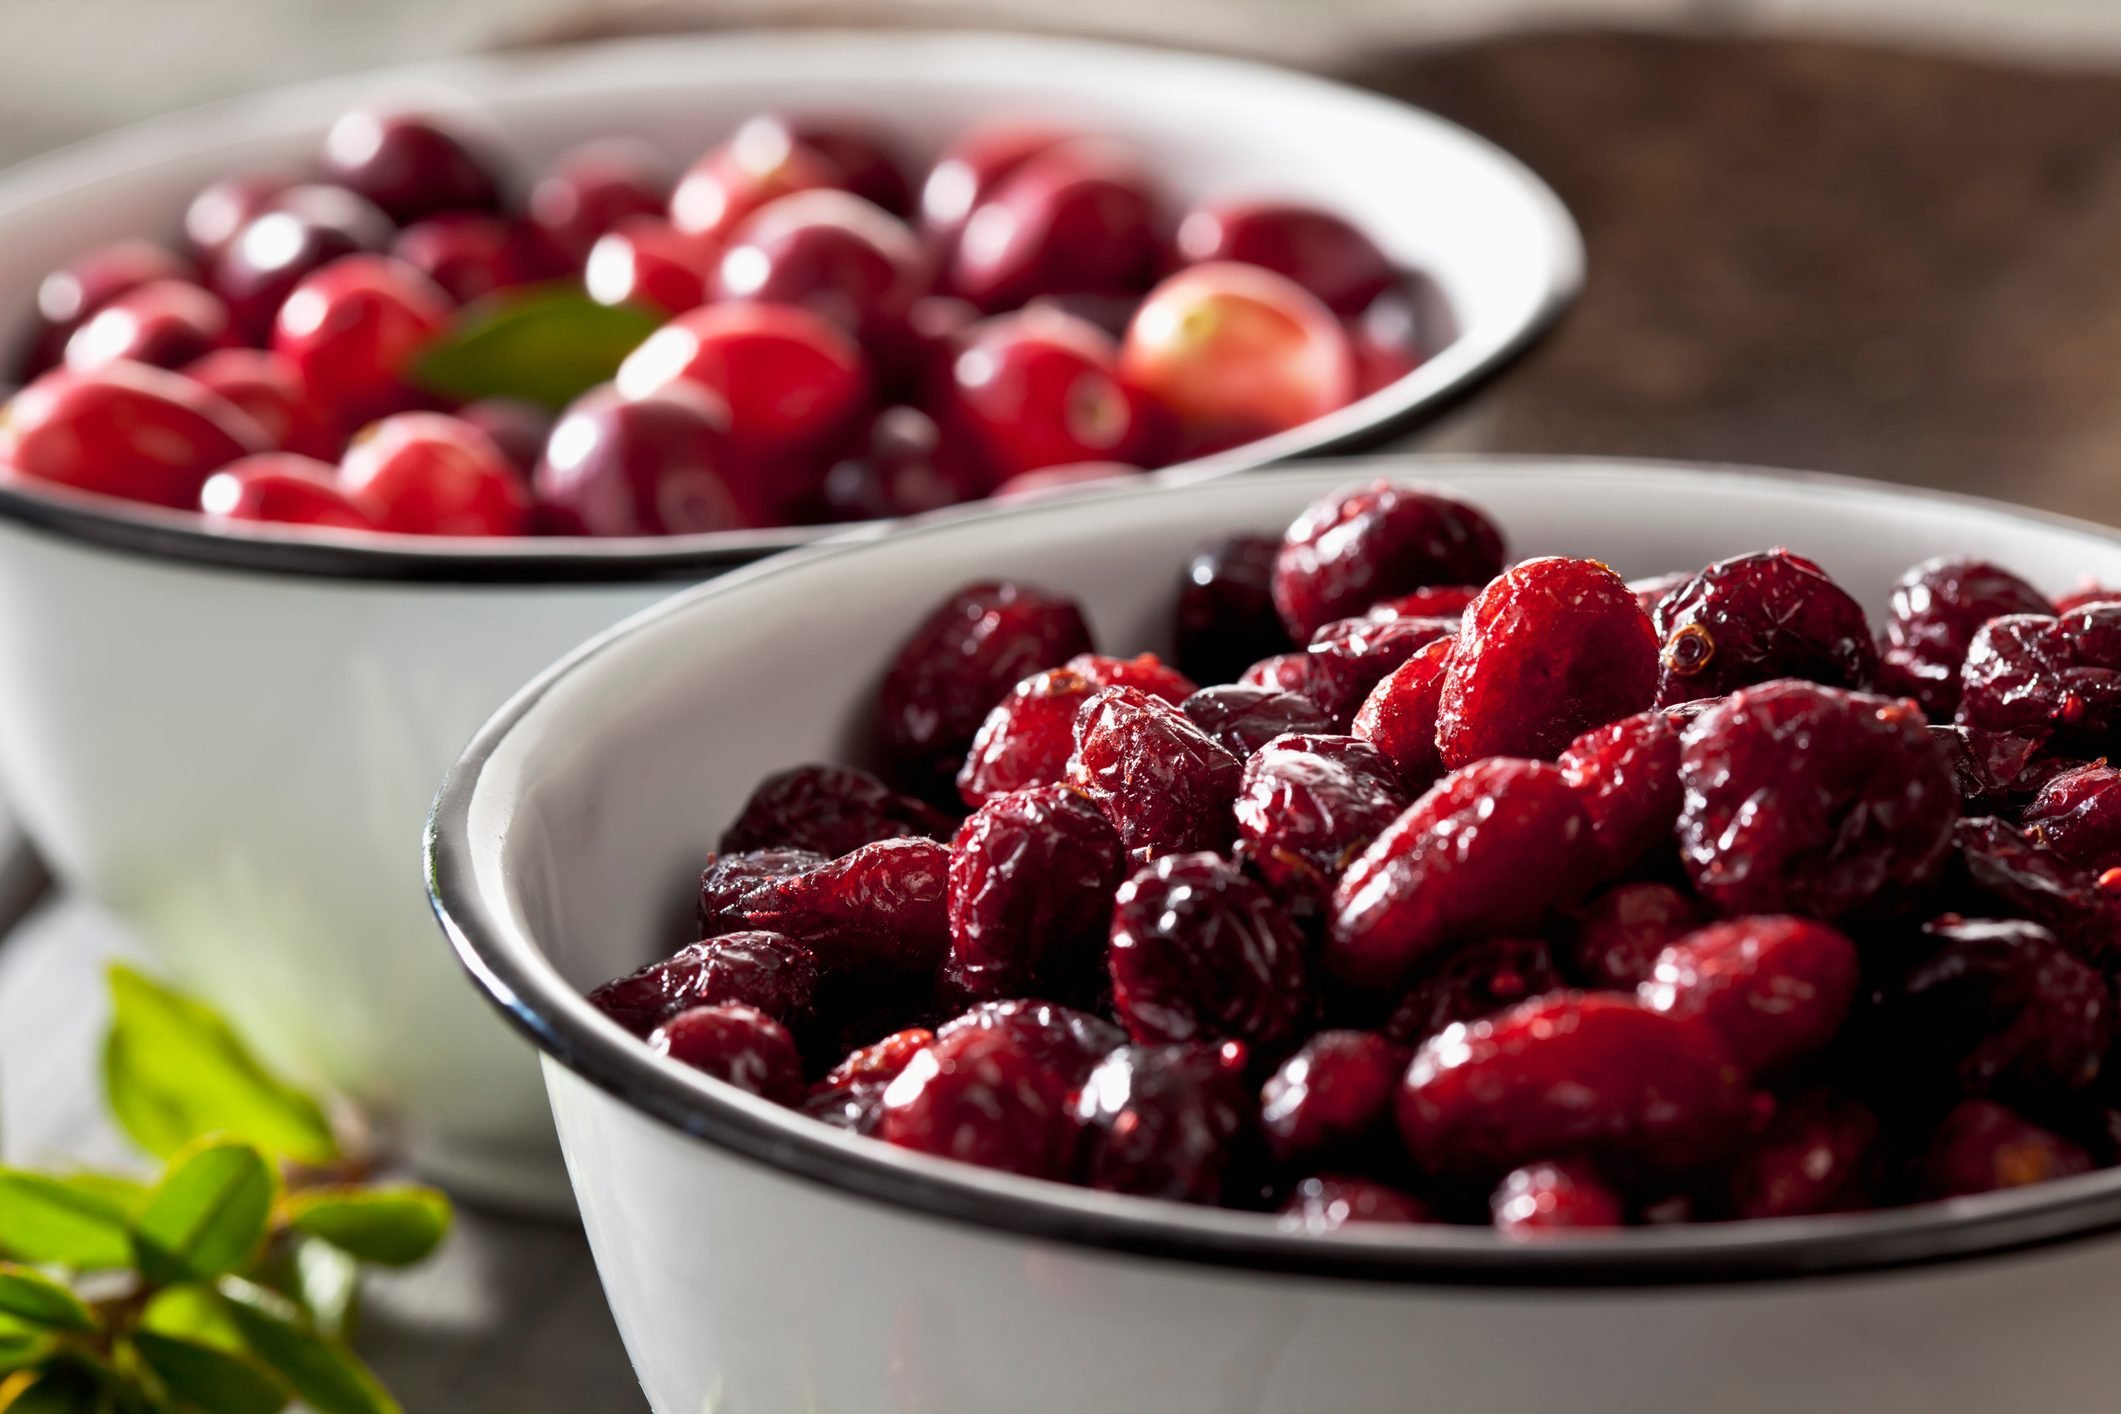 Are Dried Cranberries Good for You?